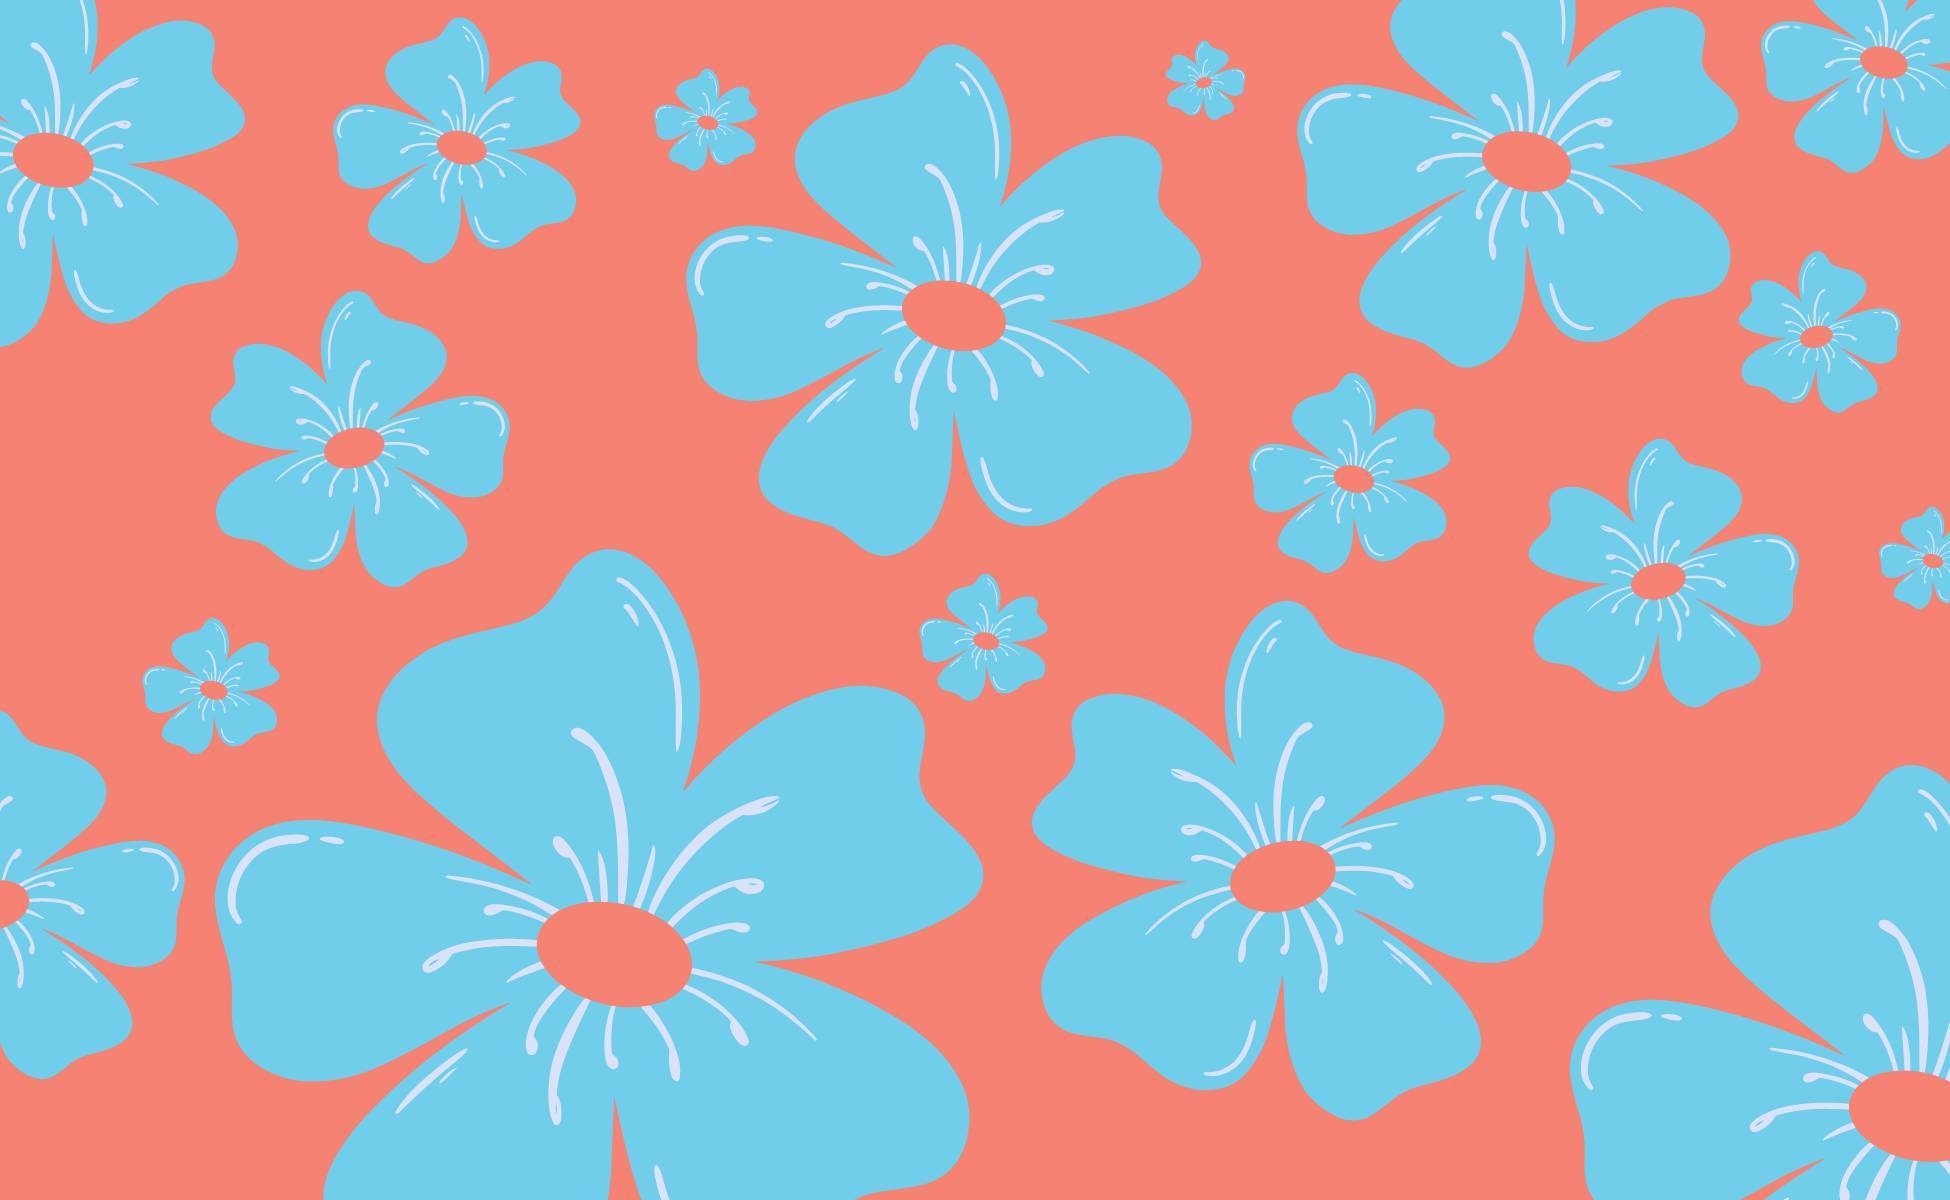 Coral background with blue flower illustrations